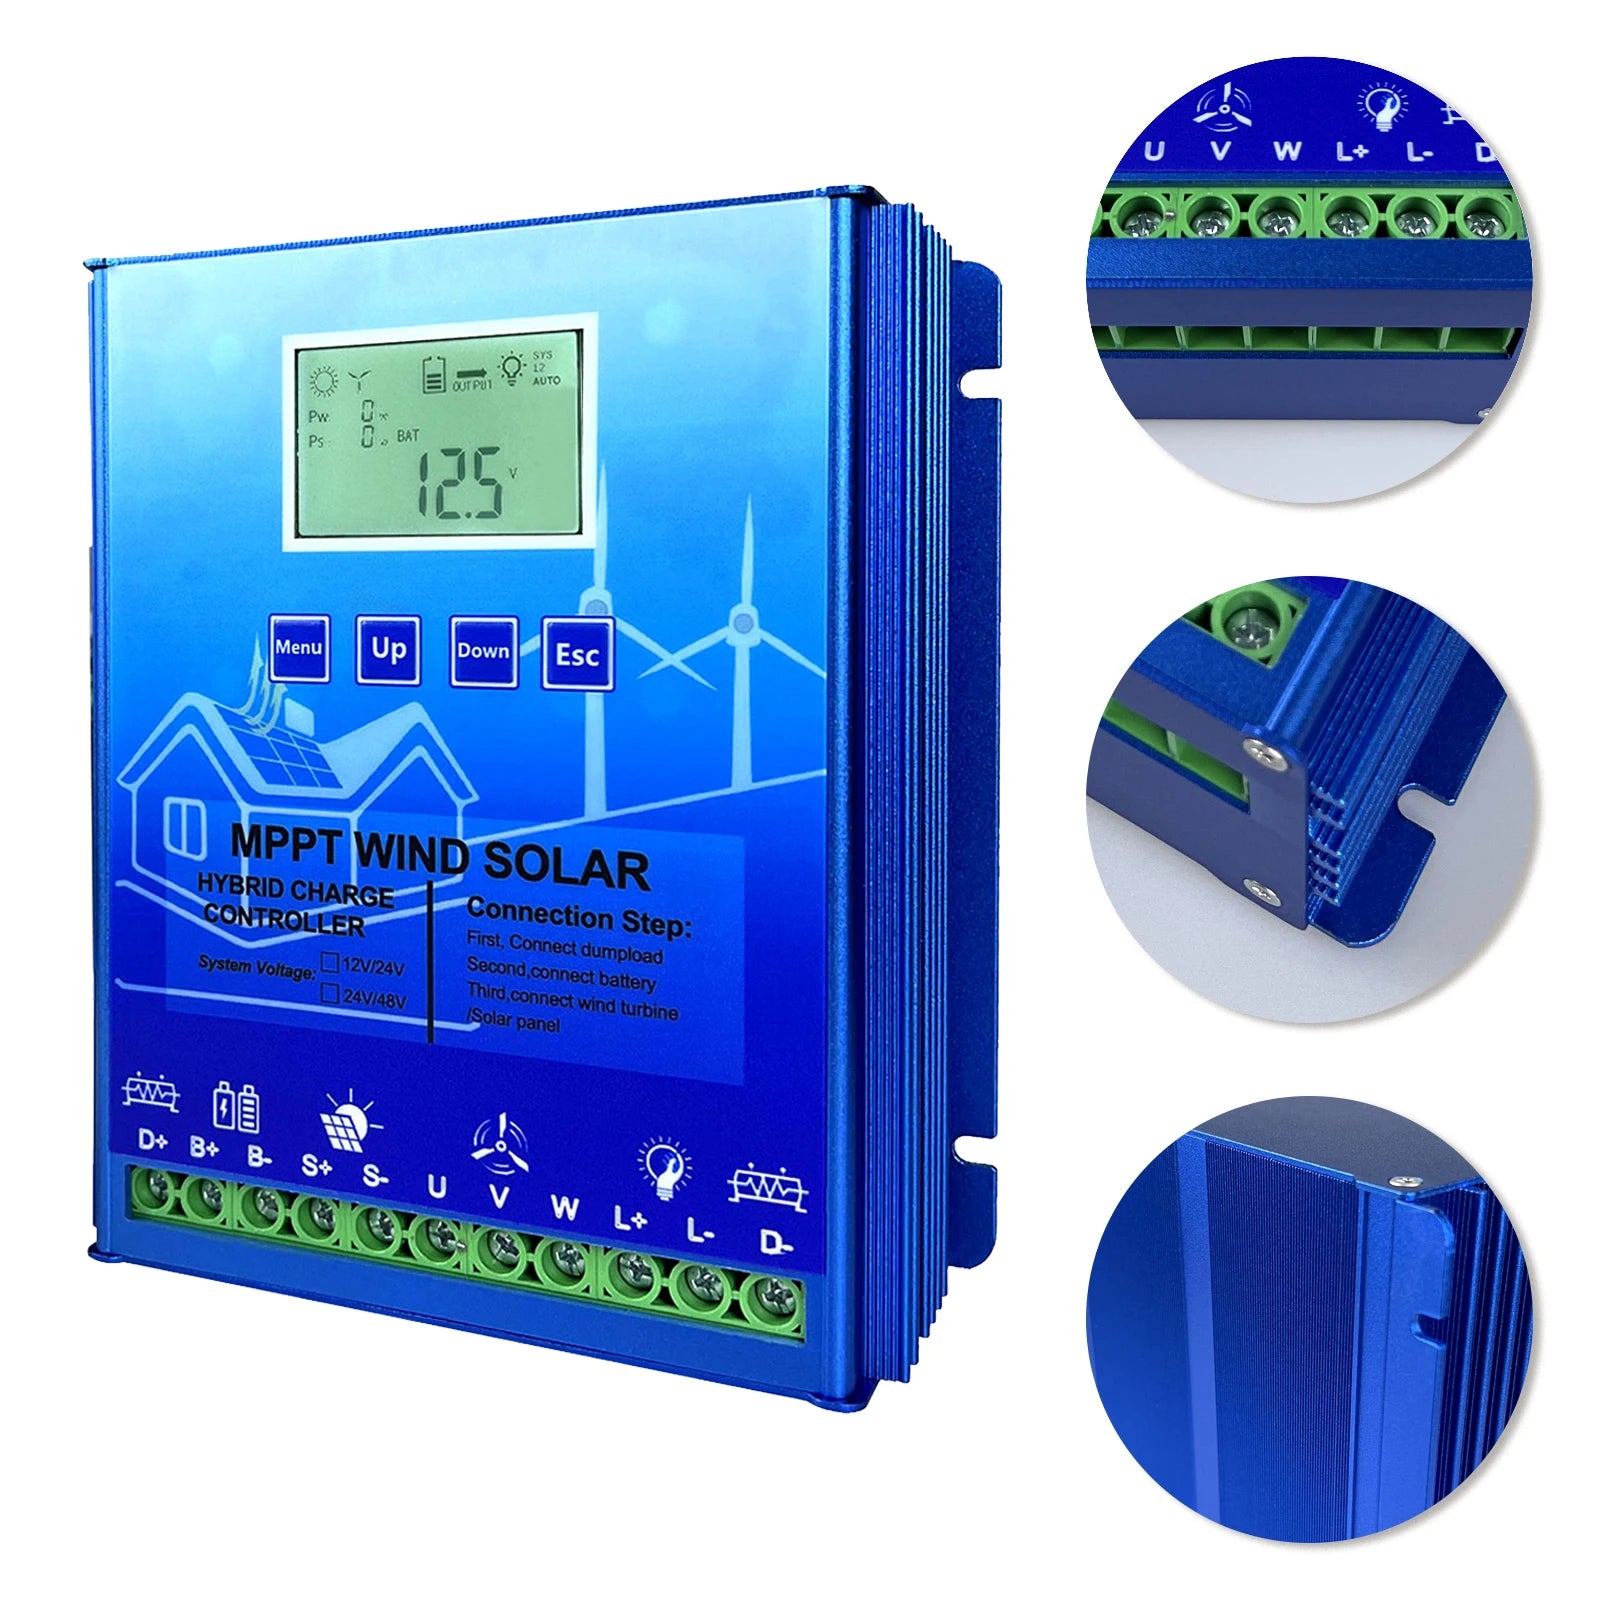 3000W MPPT Hybrid Solar Wind Charge Controller, MPPT hybrid charger supports 12V/24V/48V systems for lithium/lead-acid batteries, with WiFi regulator and wireless solar/wind connections.